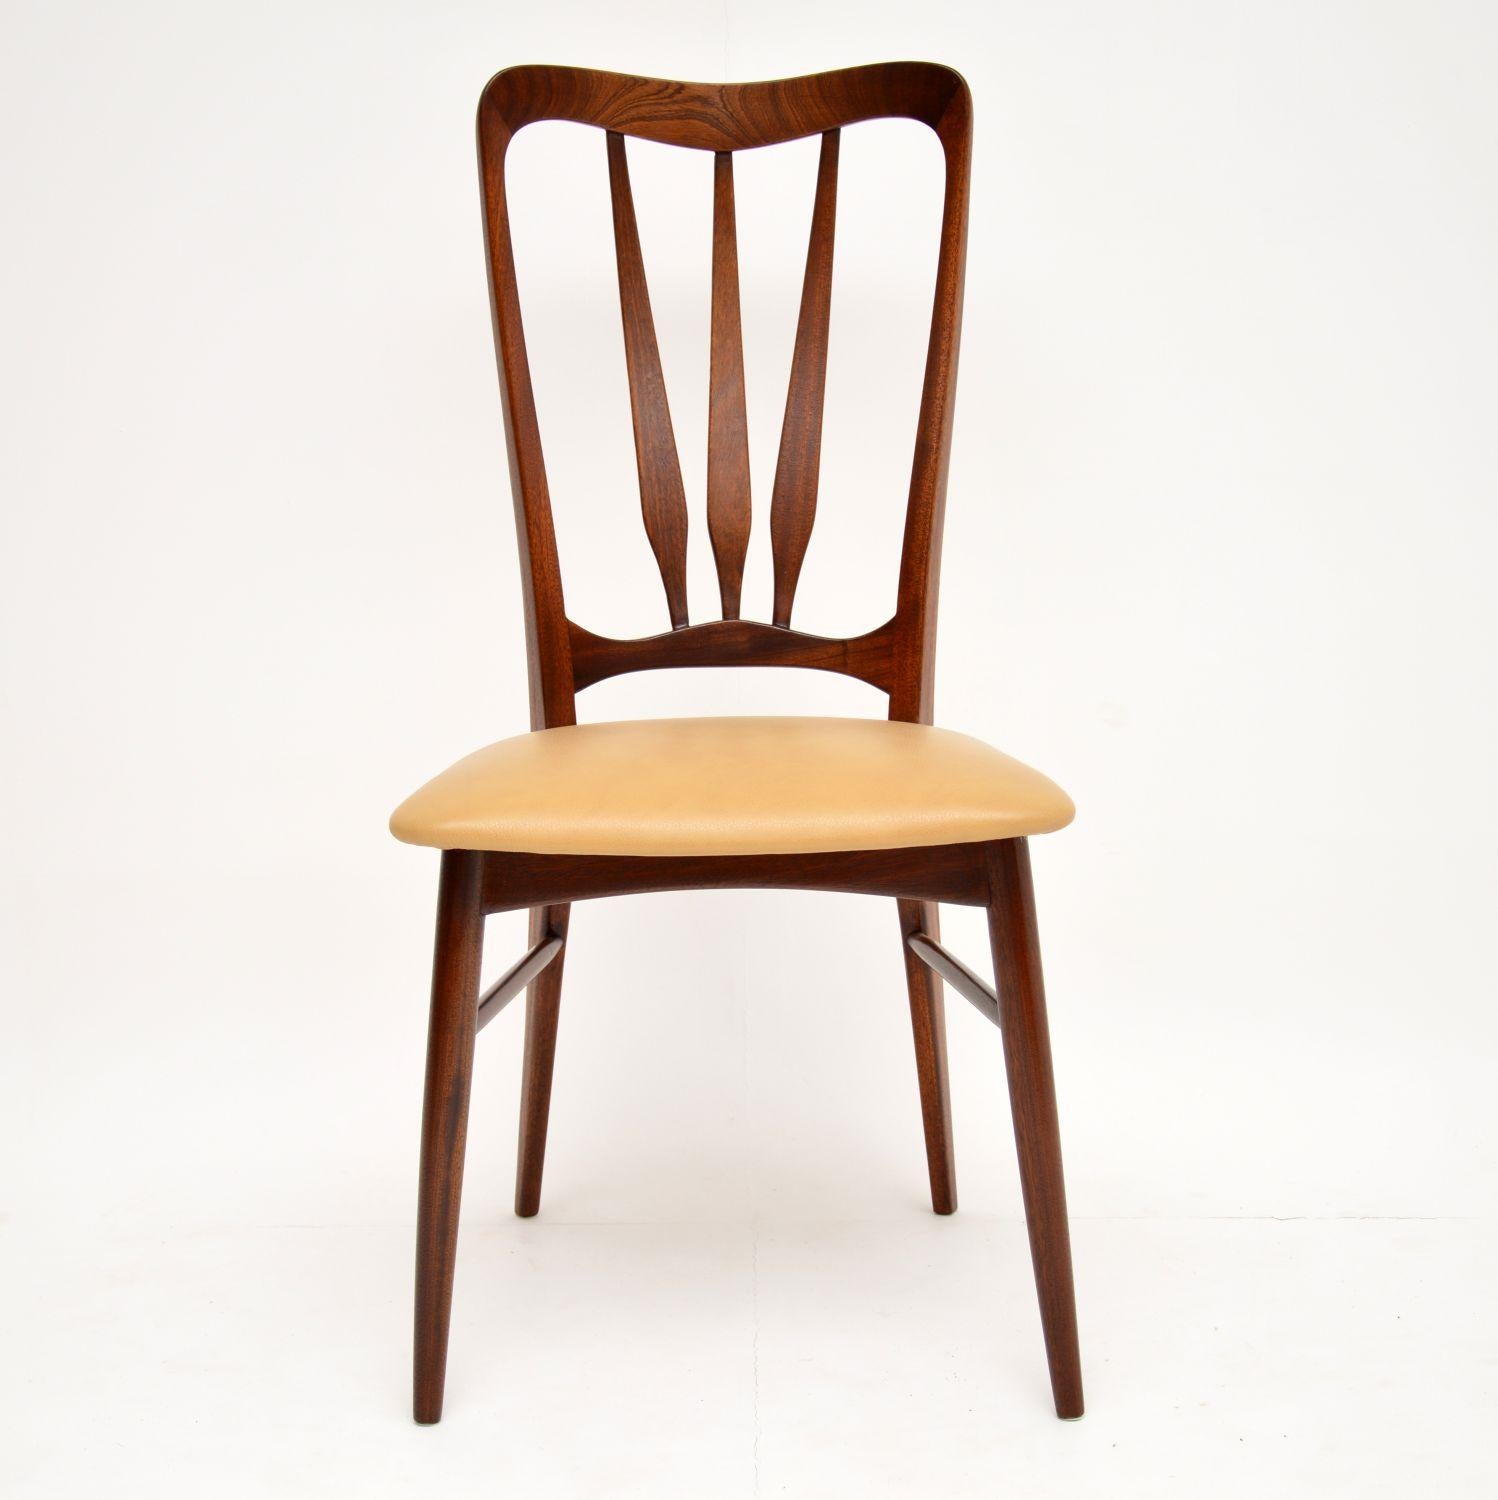 Mid-20th Century 1960s Danish Afromosia Wood and Leather Dining Chairs by Nils Kofoed